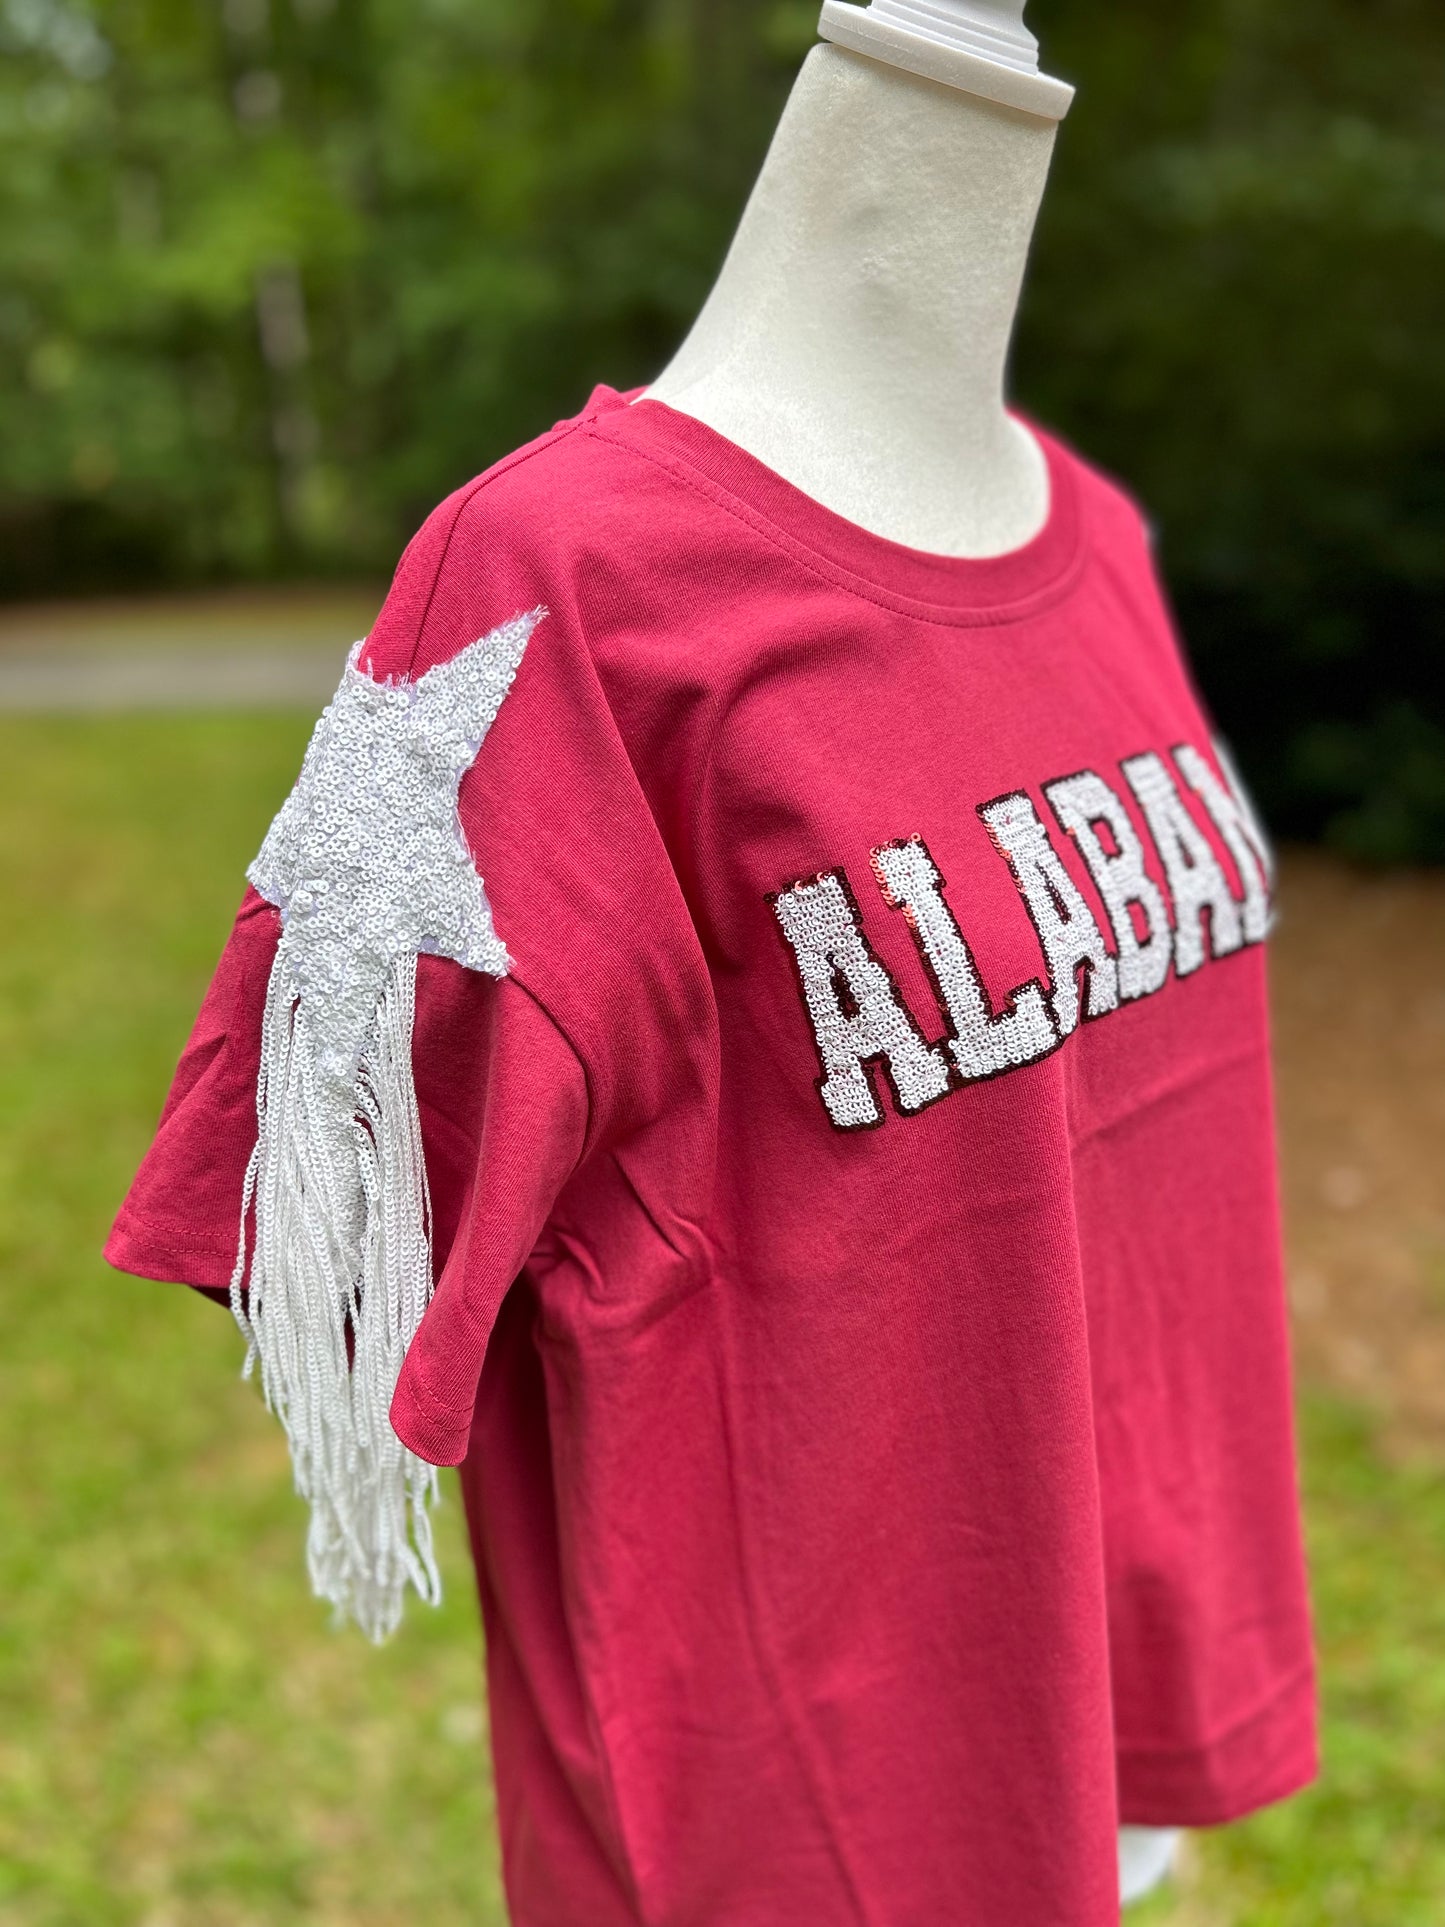 Sequin Gameday Top - multi colors!